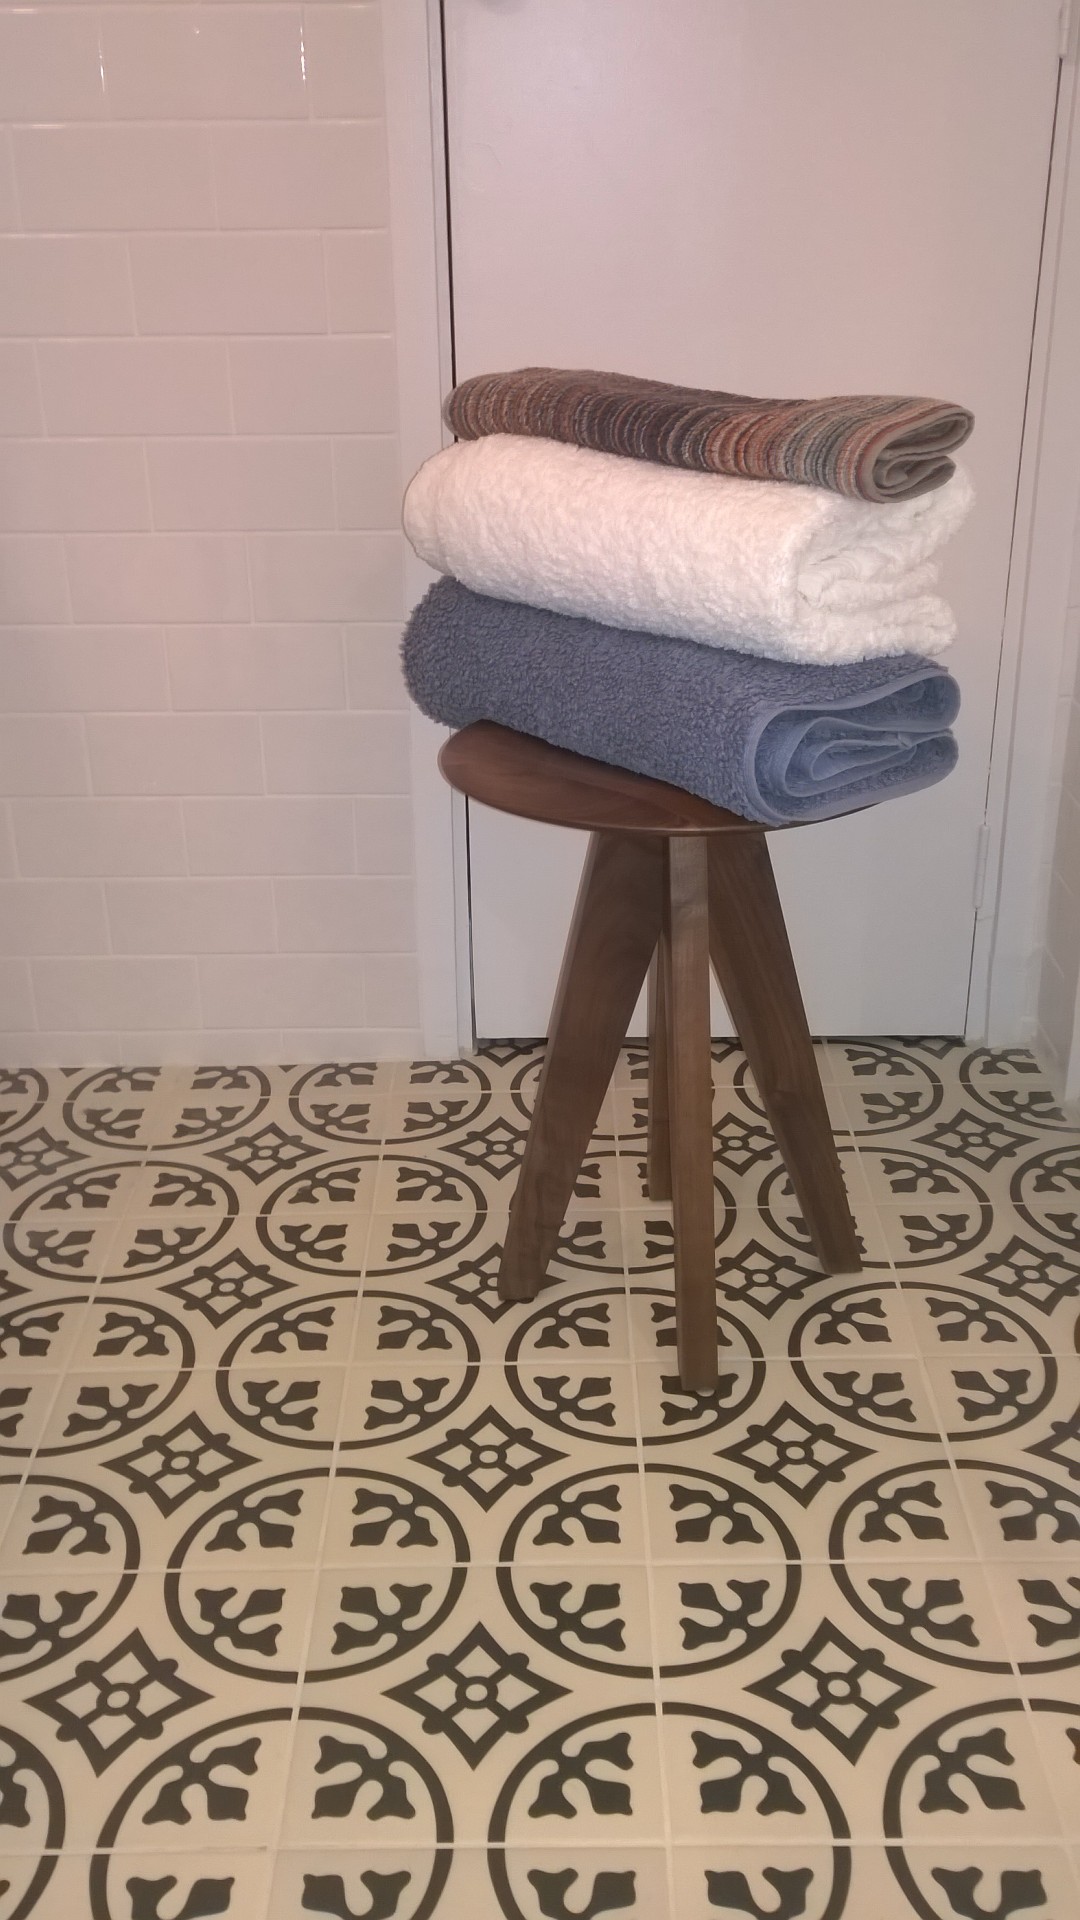 Wooden stool with folded towels on a floor with patterened floor tiles